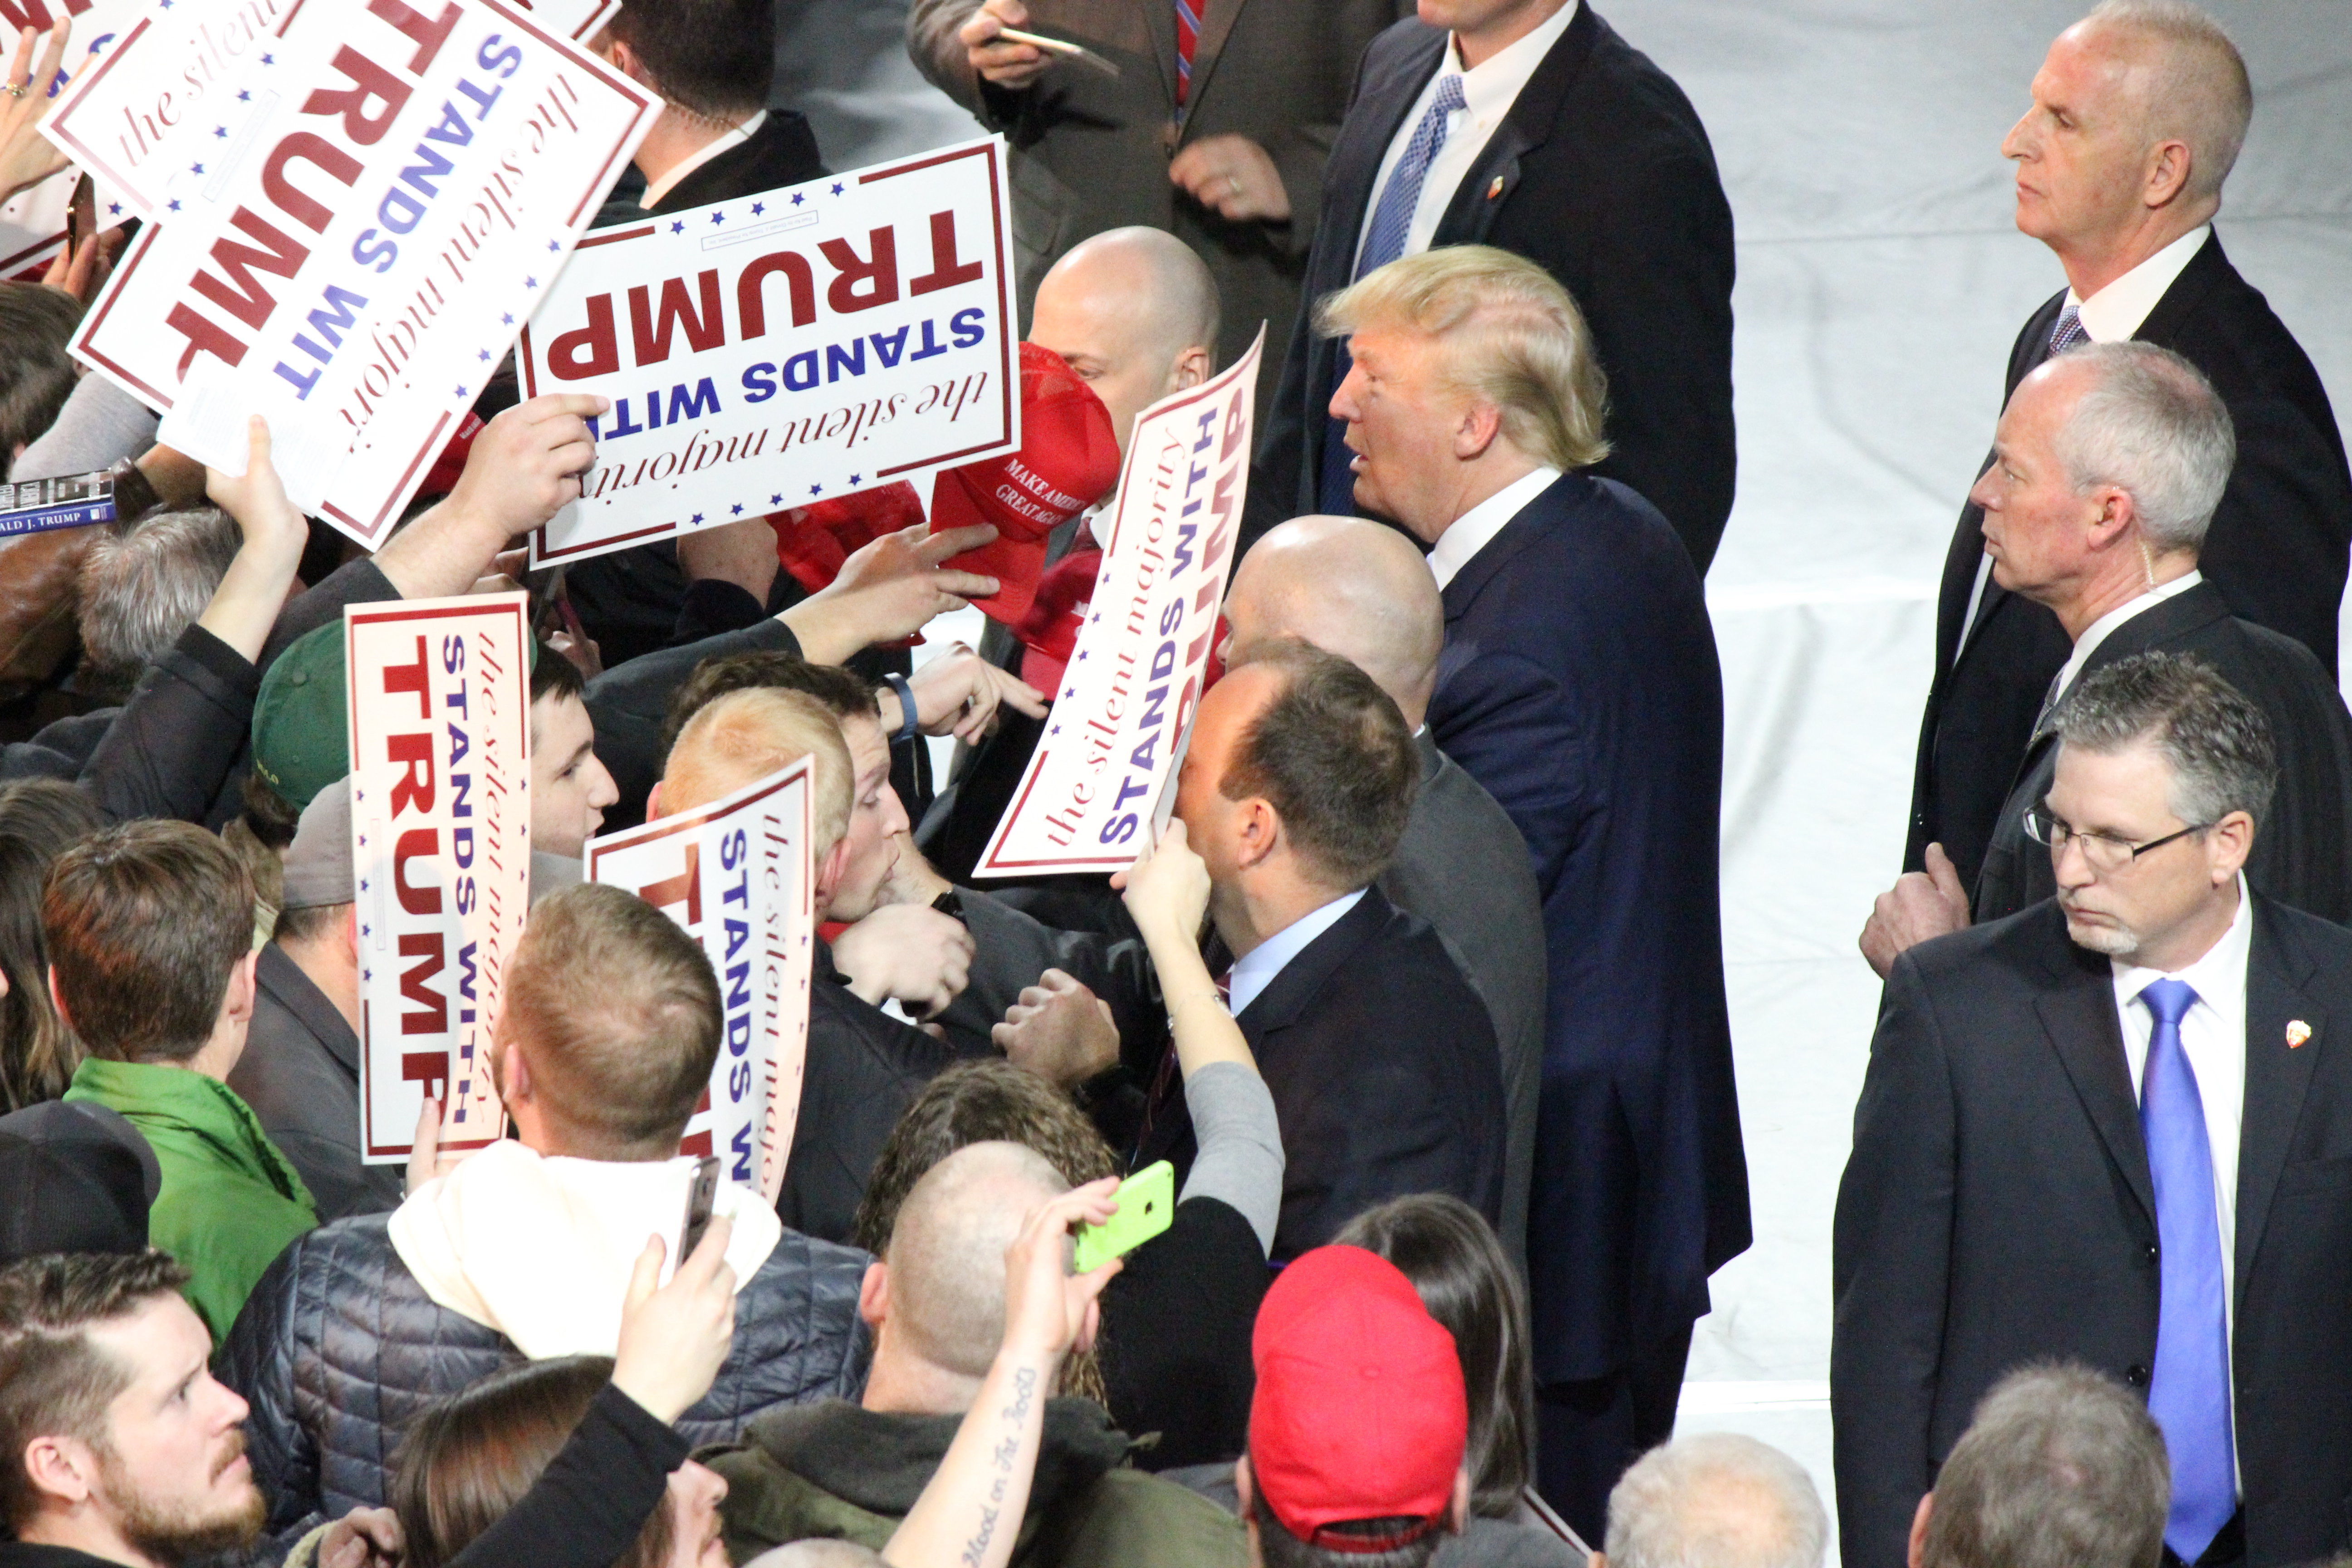 By Evan Guest - Donald Trump in Muscatine, Iowa, CC BY 2.0, https://commons.wikimedia.org/w/index.php?curid=46705061